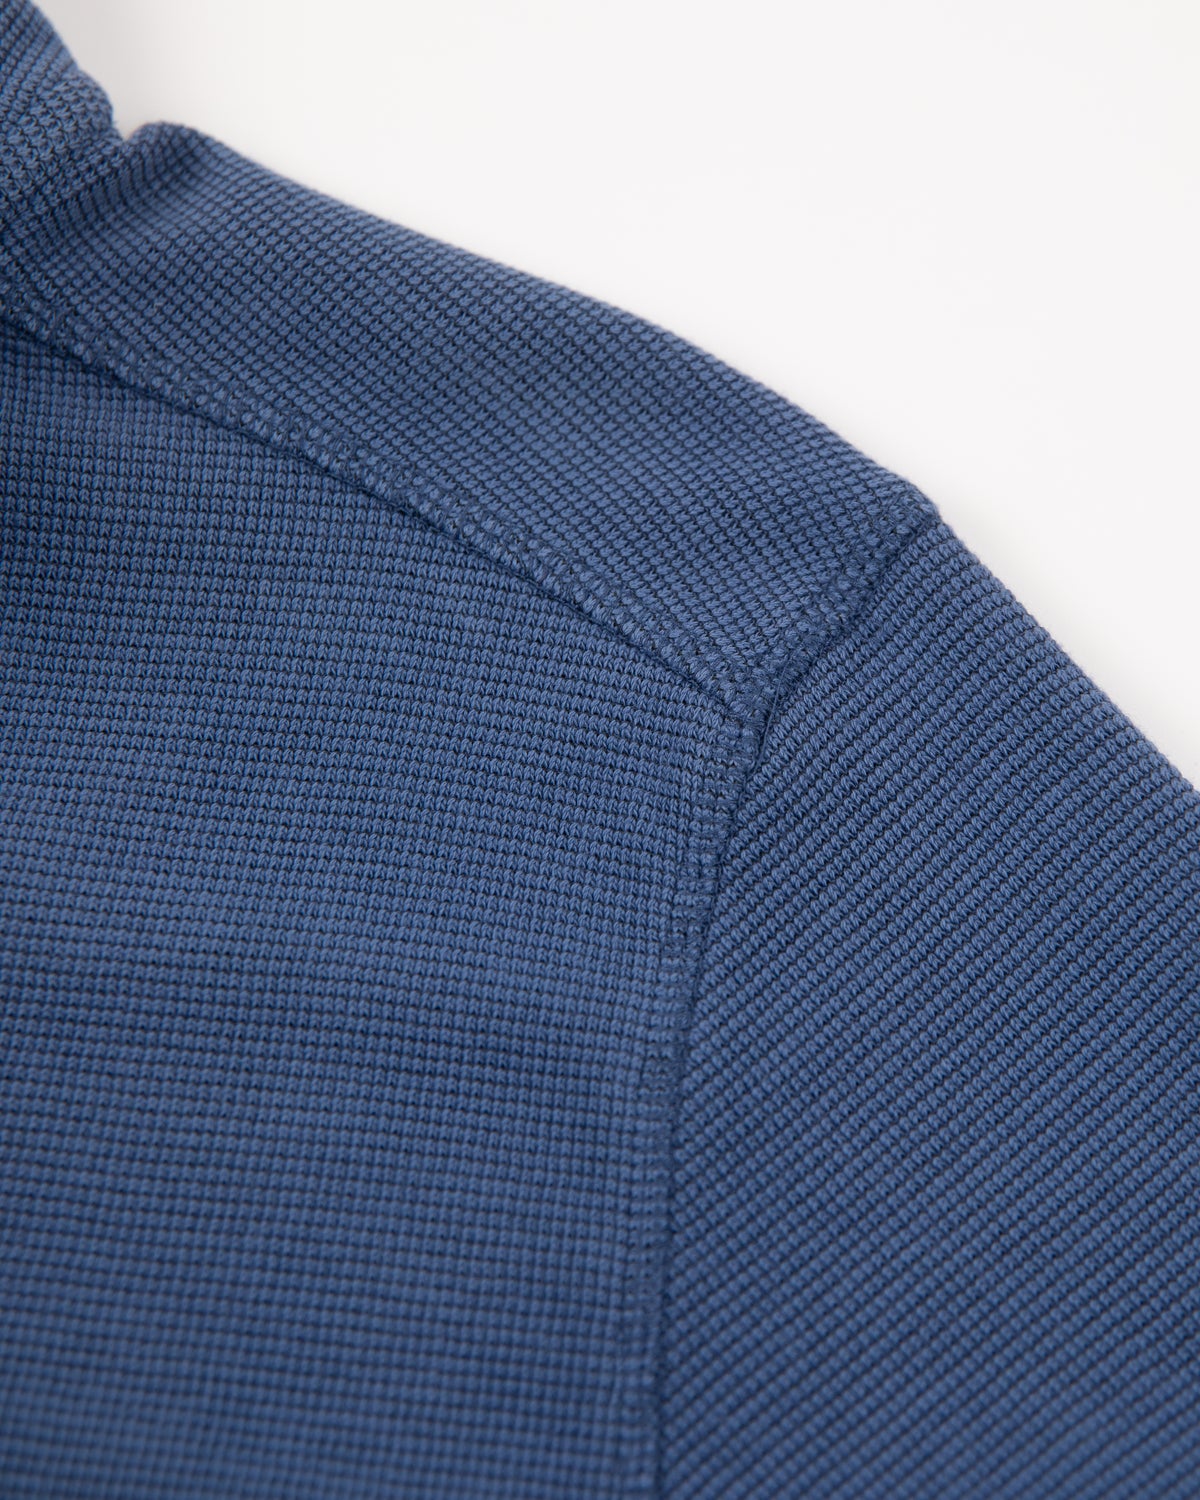 Plain half-zip sweater from cotton lead blue | NZA New Zealand Auckland